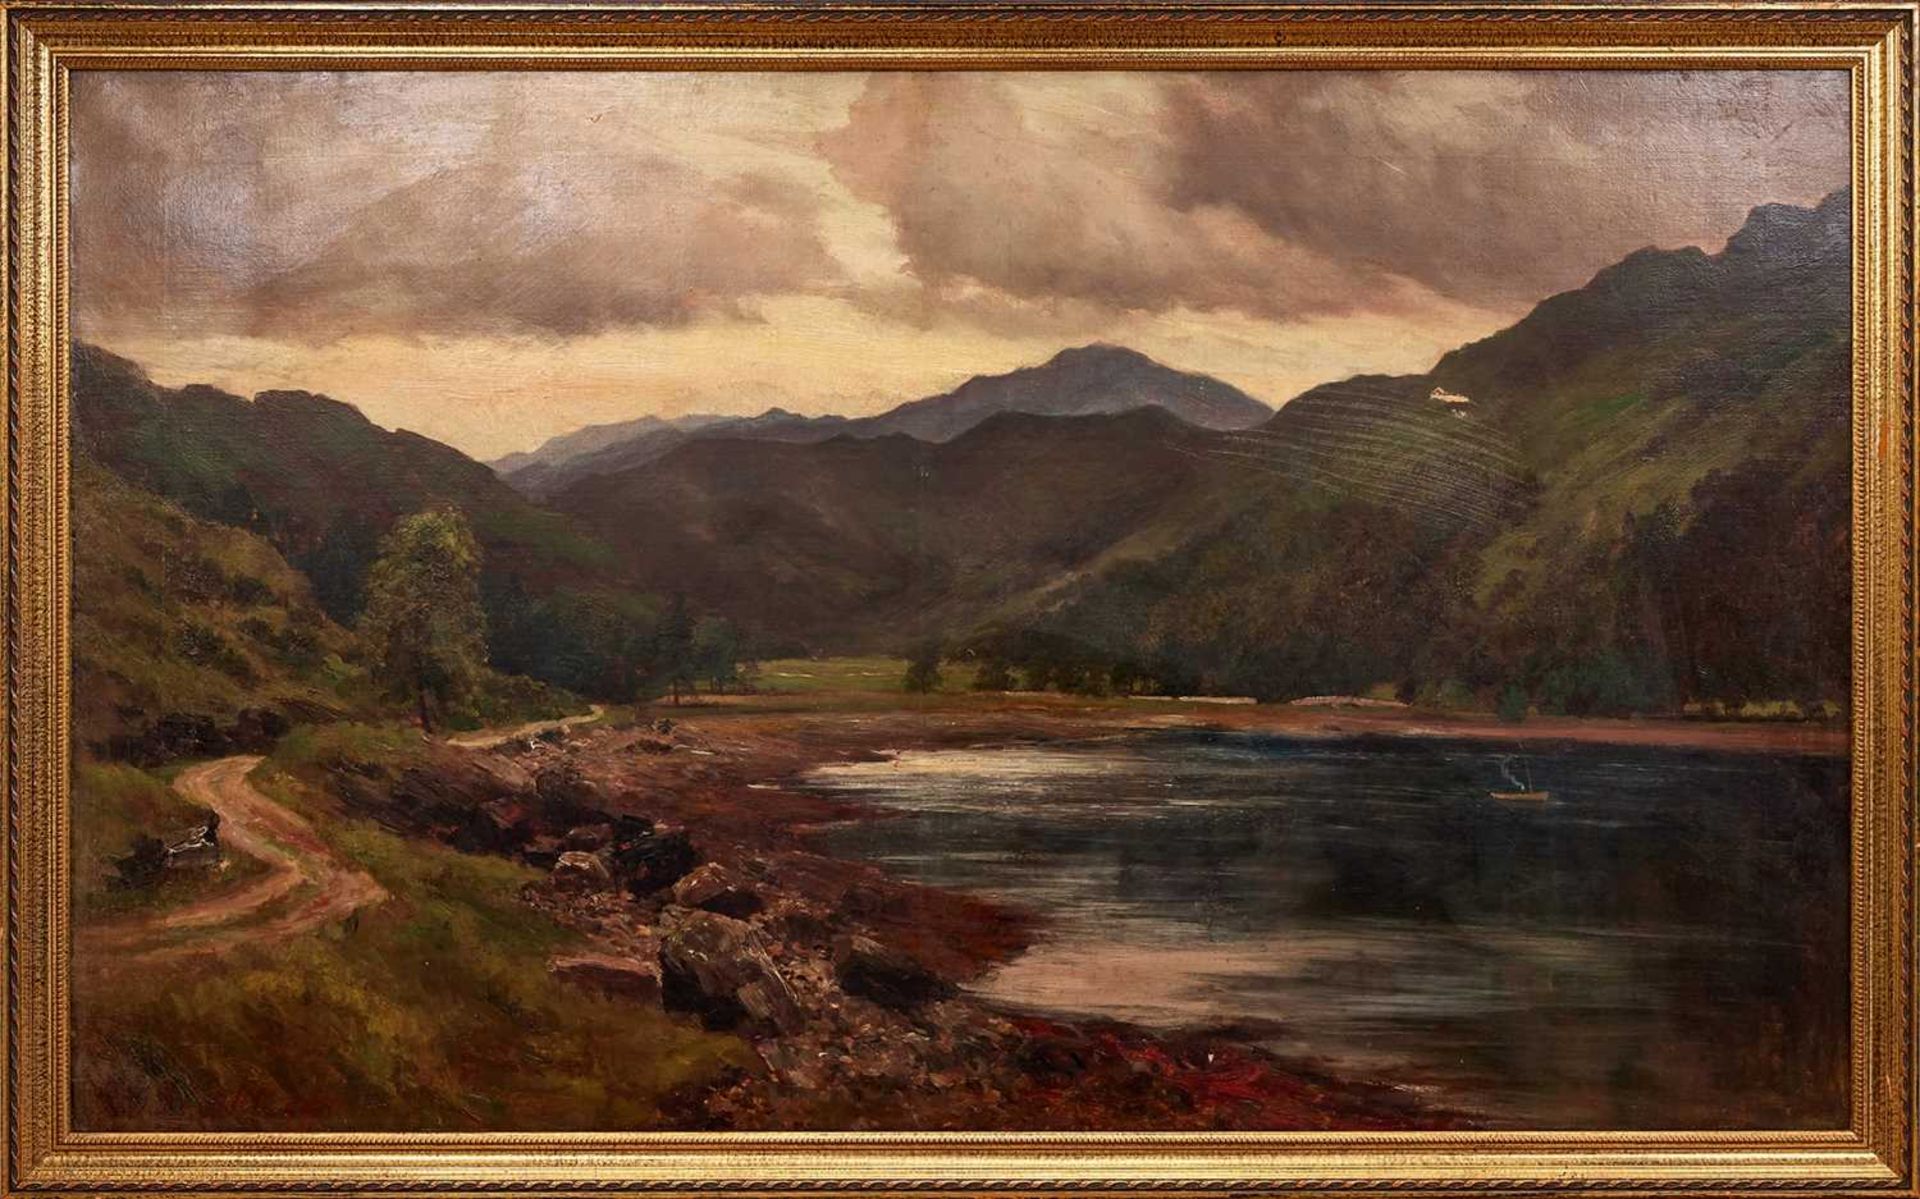 A LARGE EARLY 20TH CENTURY LANDSCAPE PAINTING